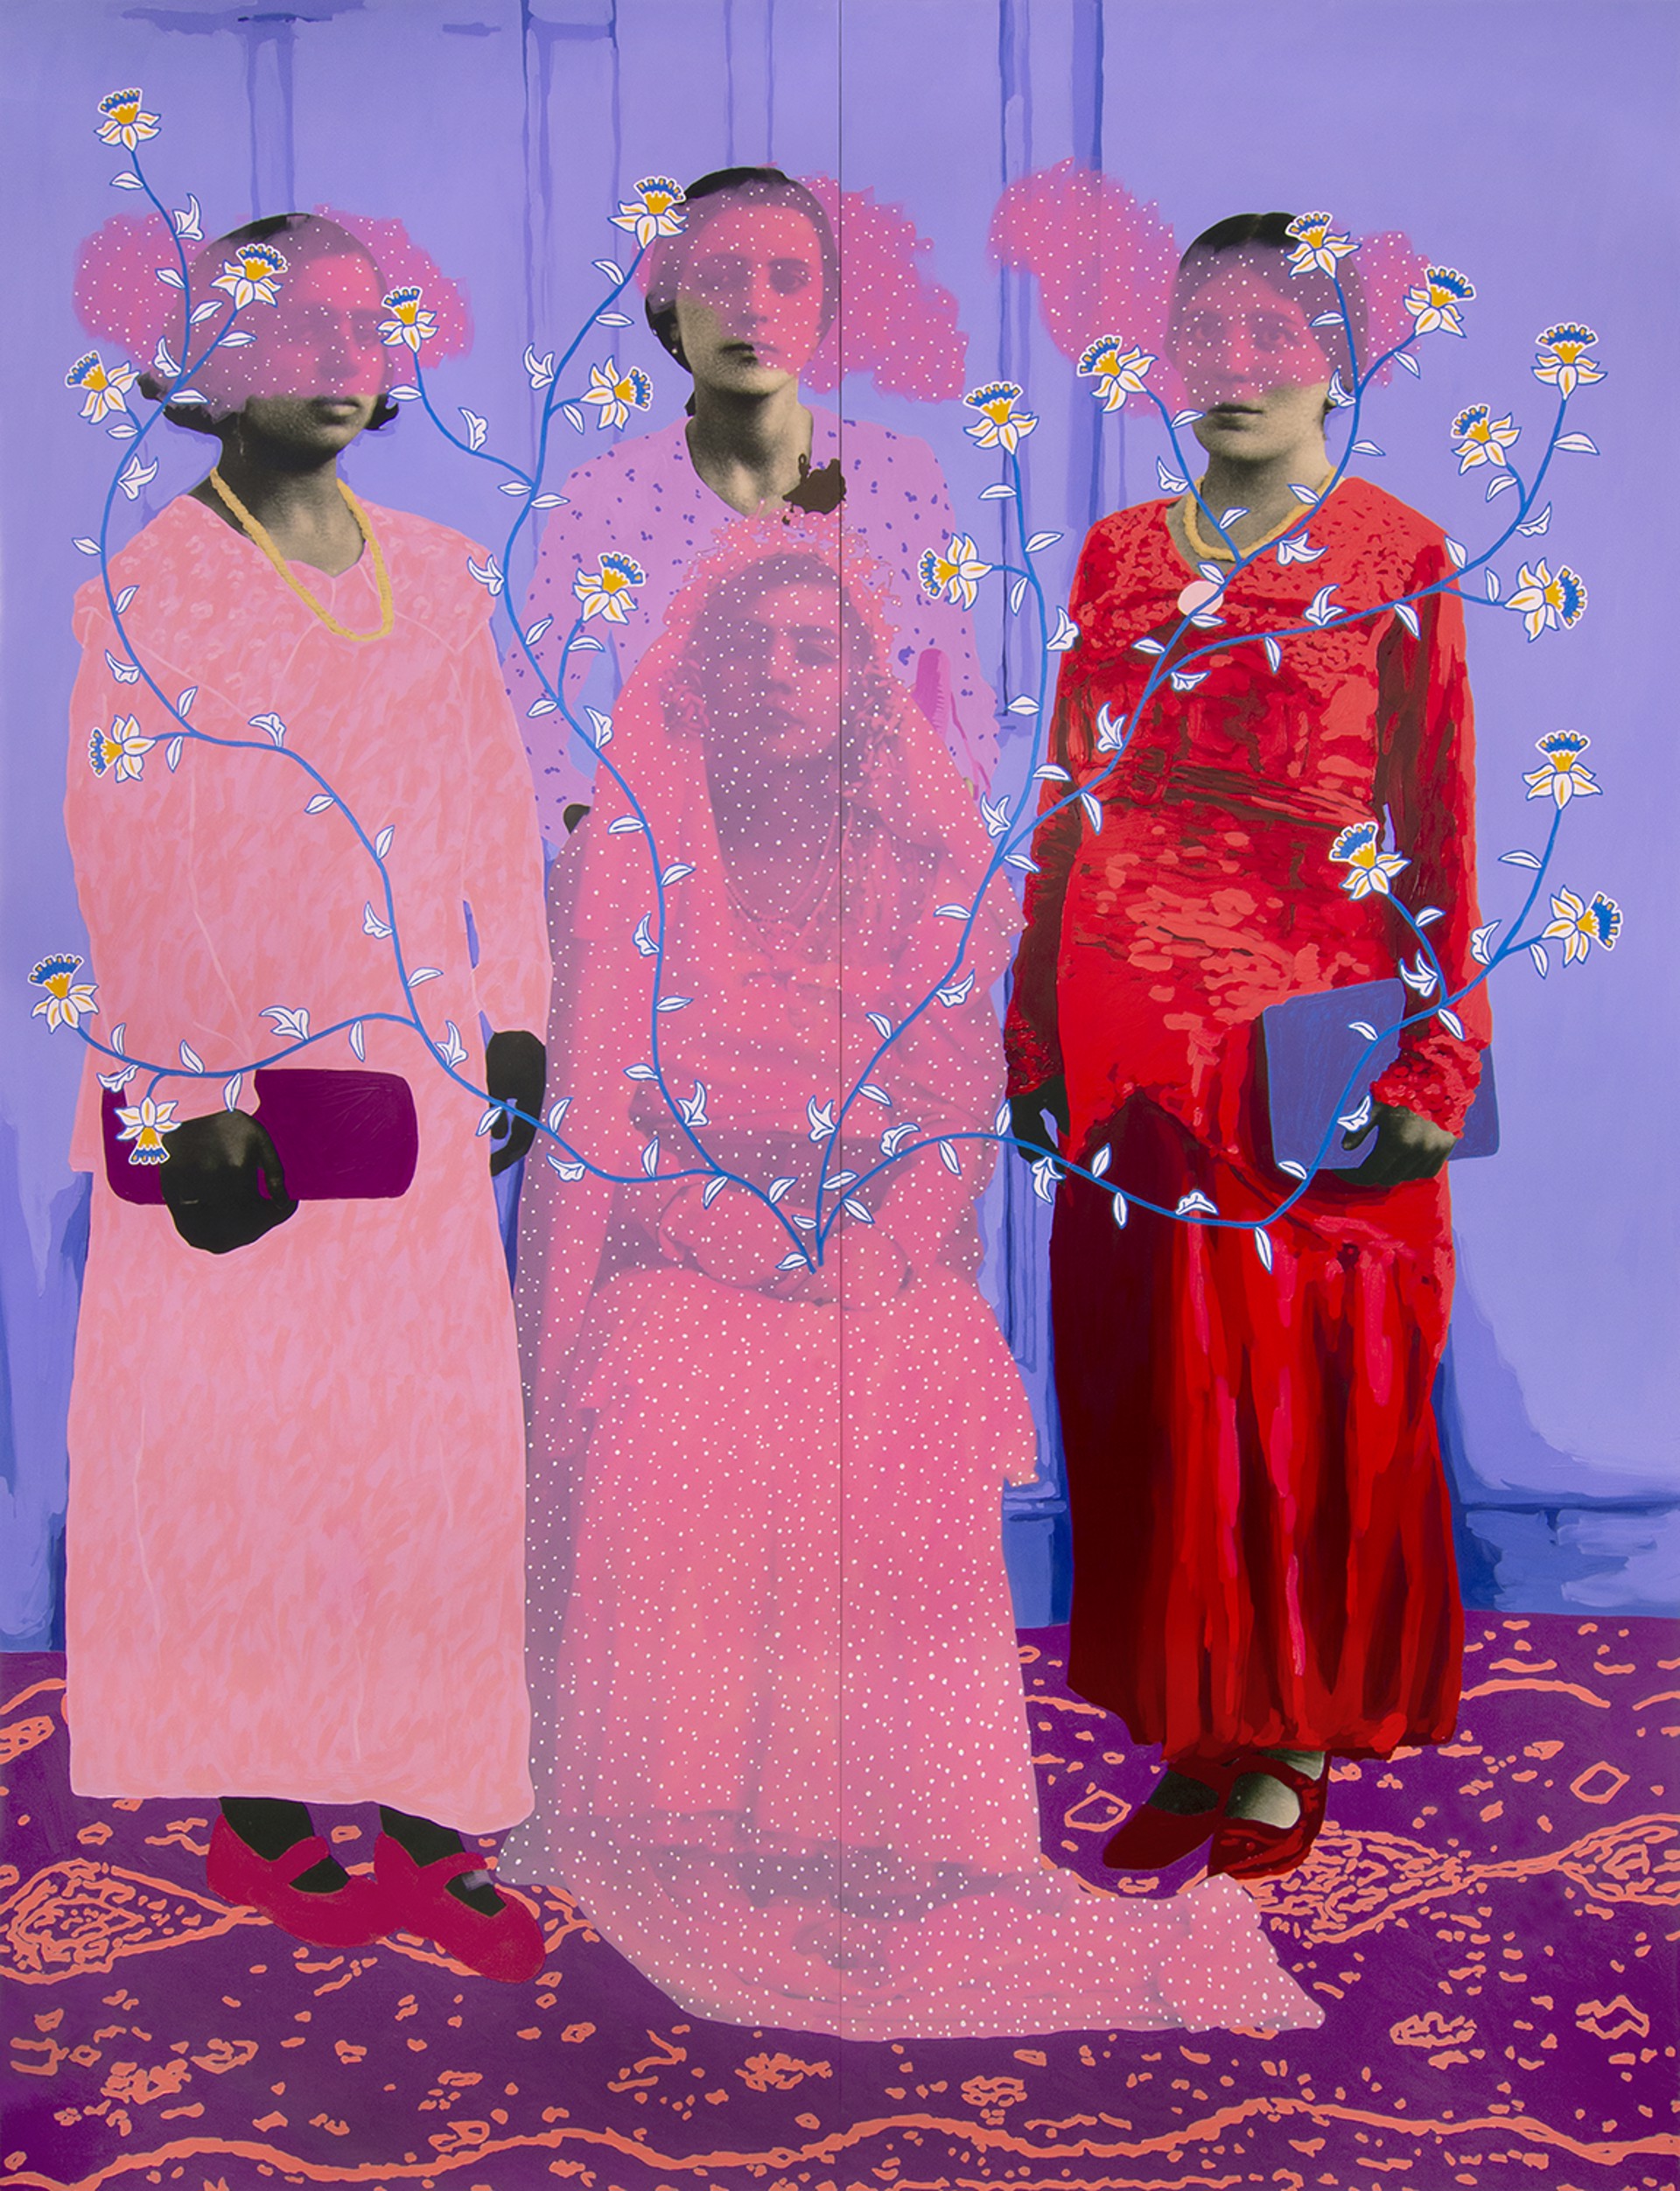 Untitled (The Bridal Party) by Daisy Patton